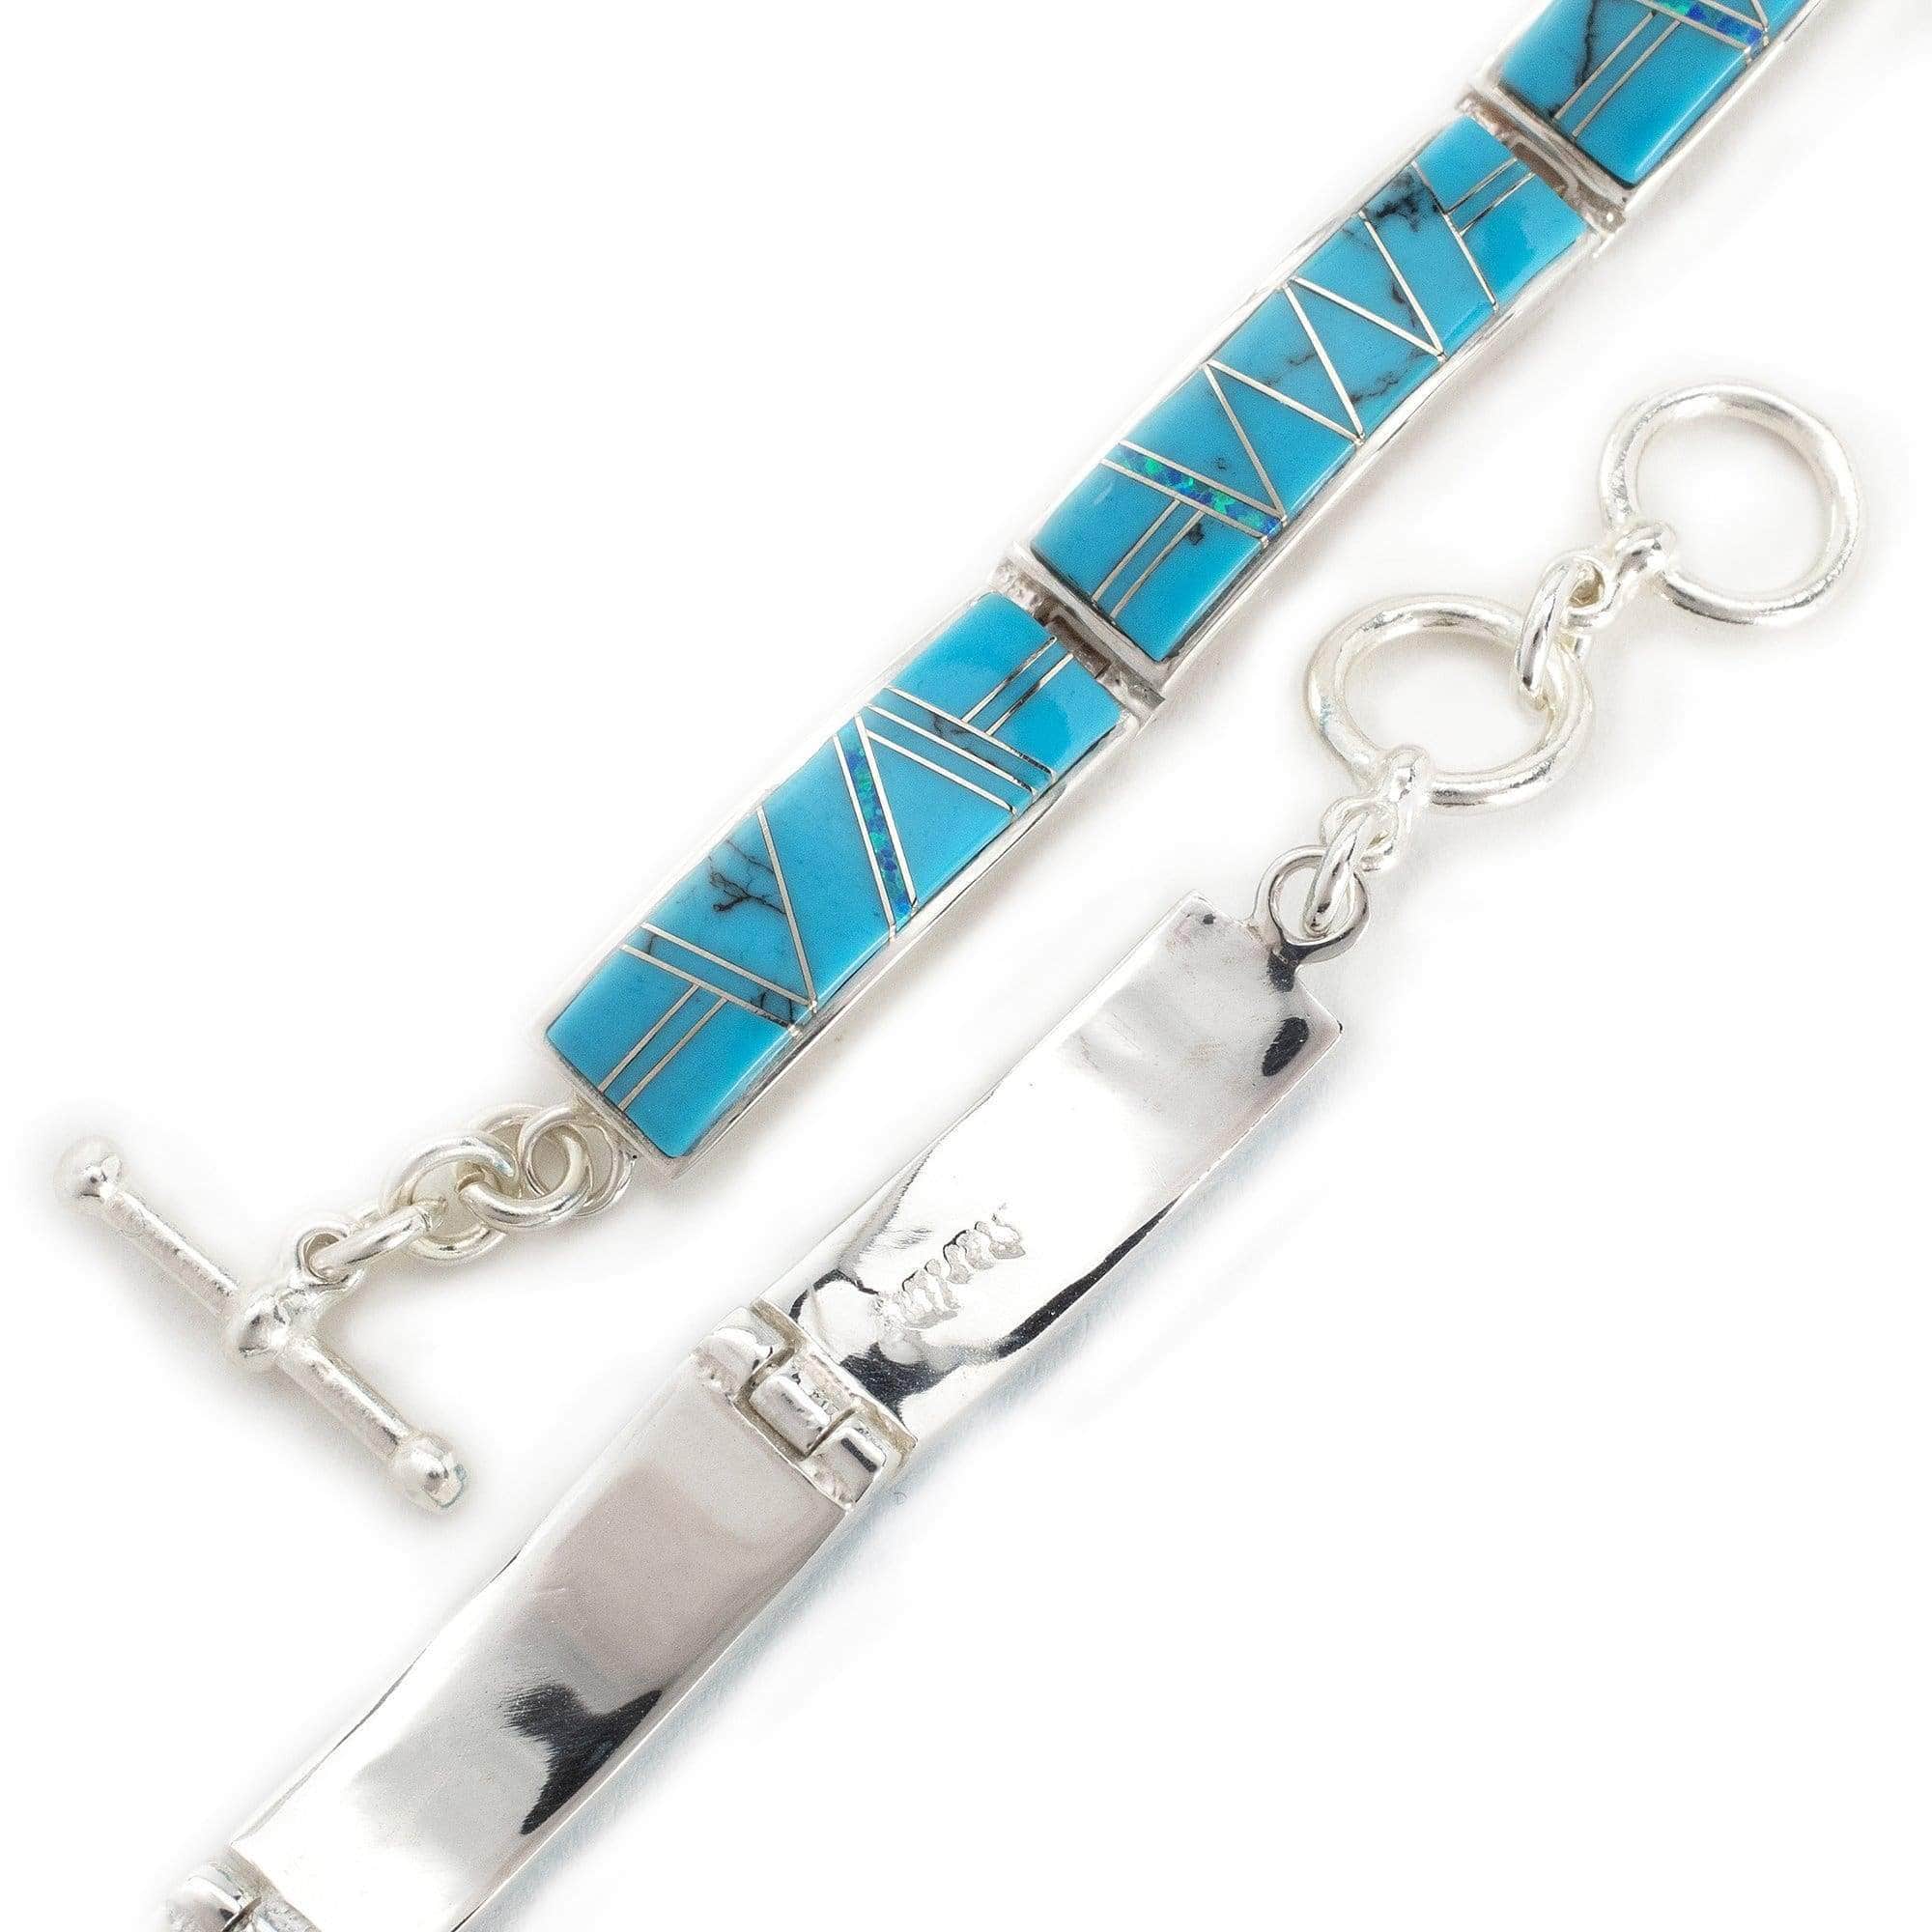 Kalifano Southwest Silver Jewelry Turquoise 925 Sterling Silver Bracelet USA Handmade with Opal Accent NMB.0565.TQ